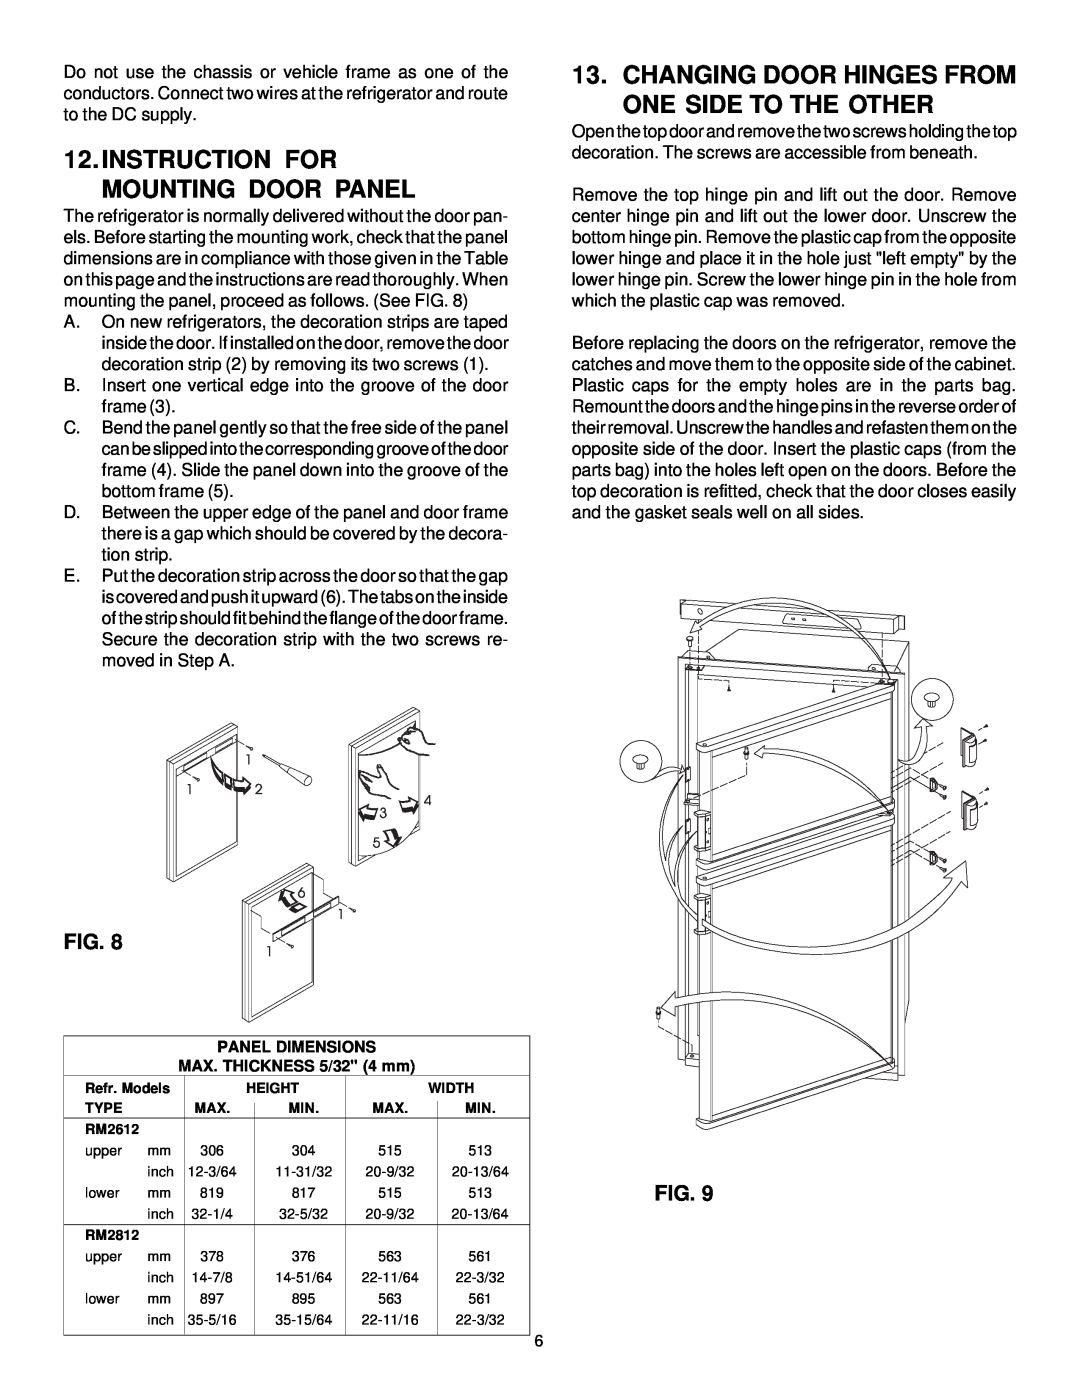 Dometic RM2612, RM2812 manual Instruction For Mounting Door Panel, Changing Door Hinges From One Side To The Other 